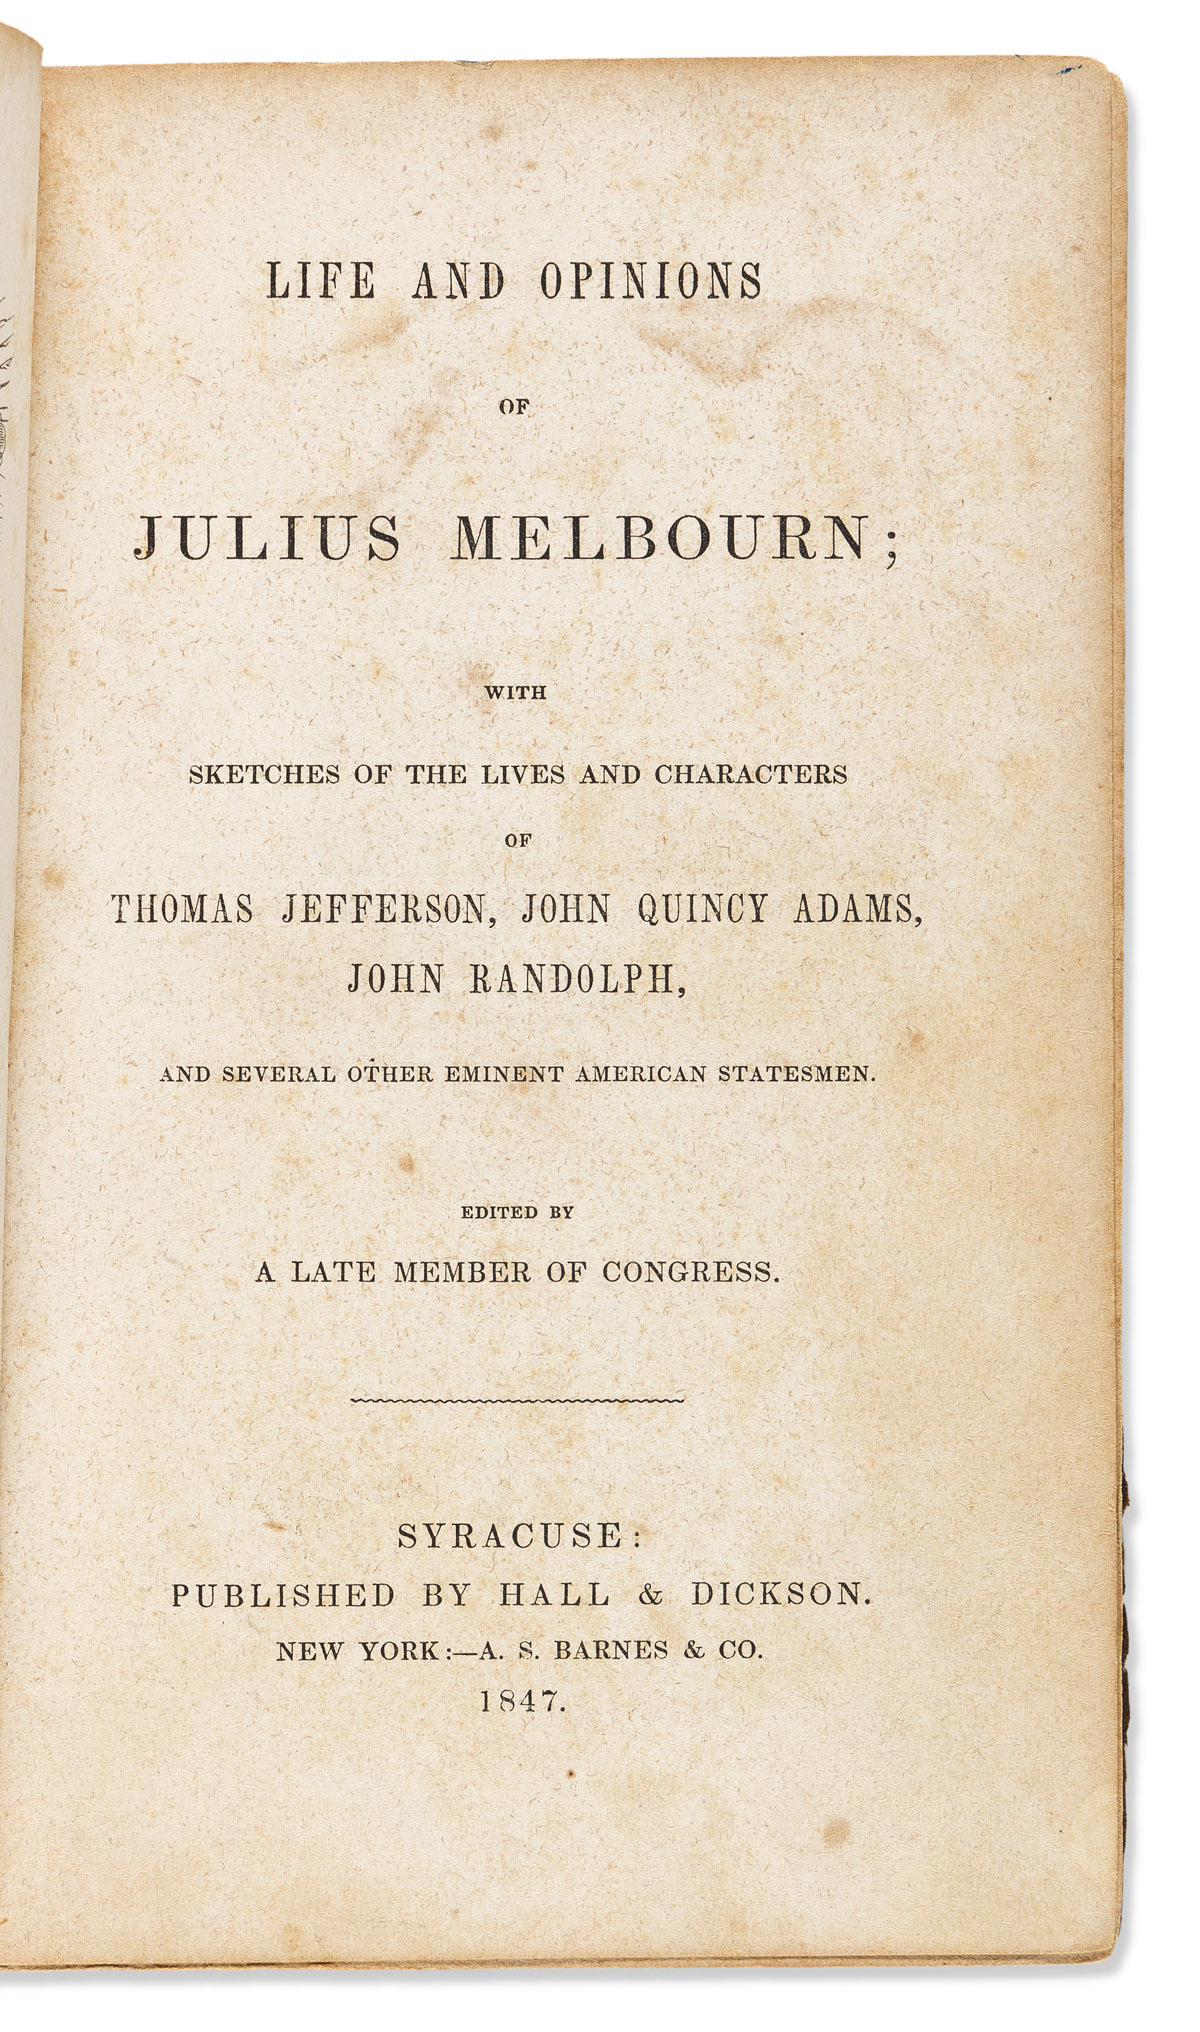 (SLAVERY & ABOLITION.) Life and Opinions of Julius Melbourn.